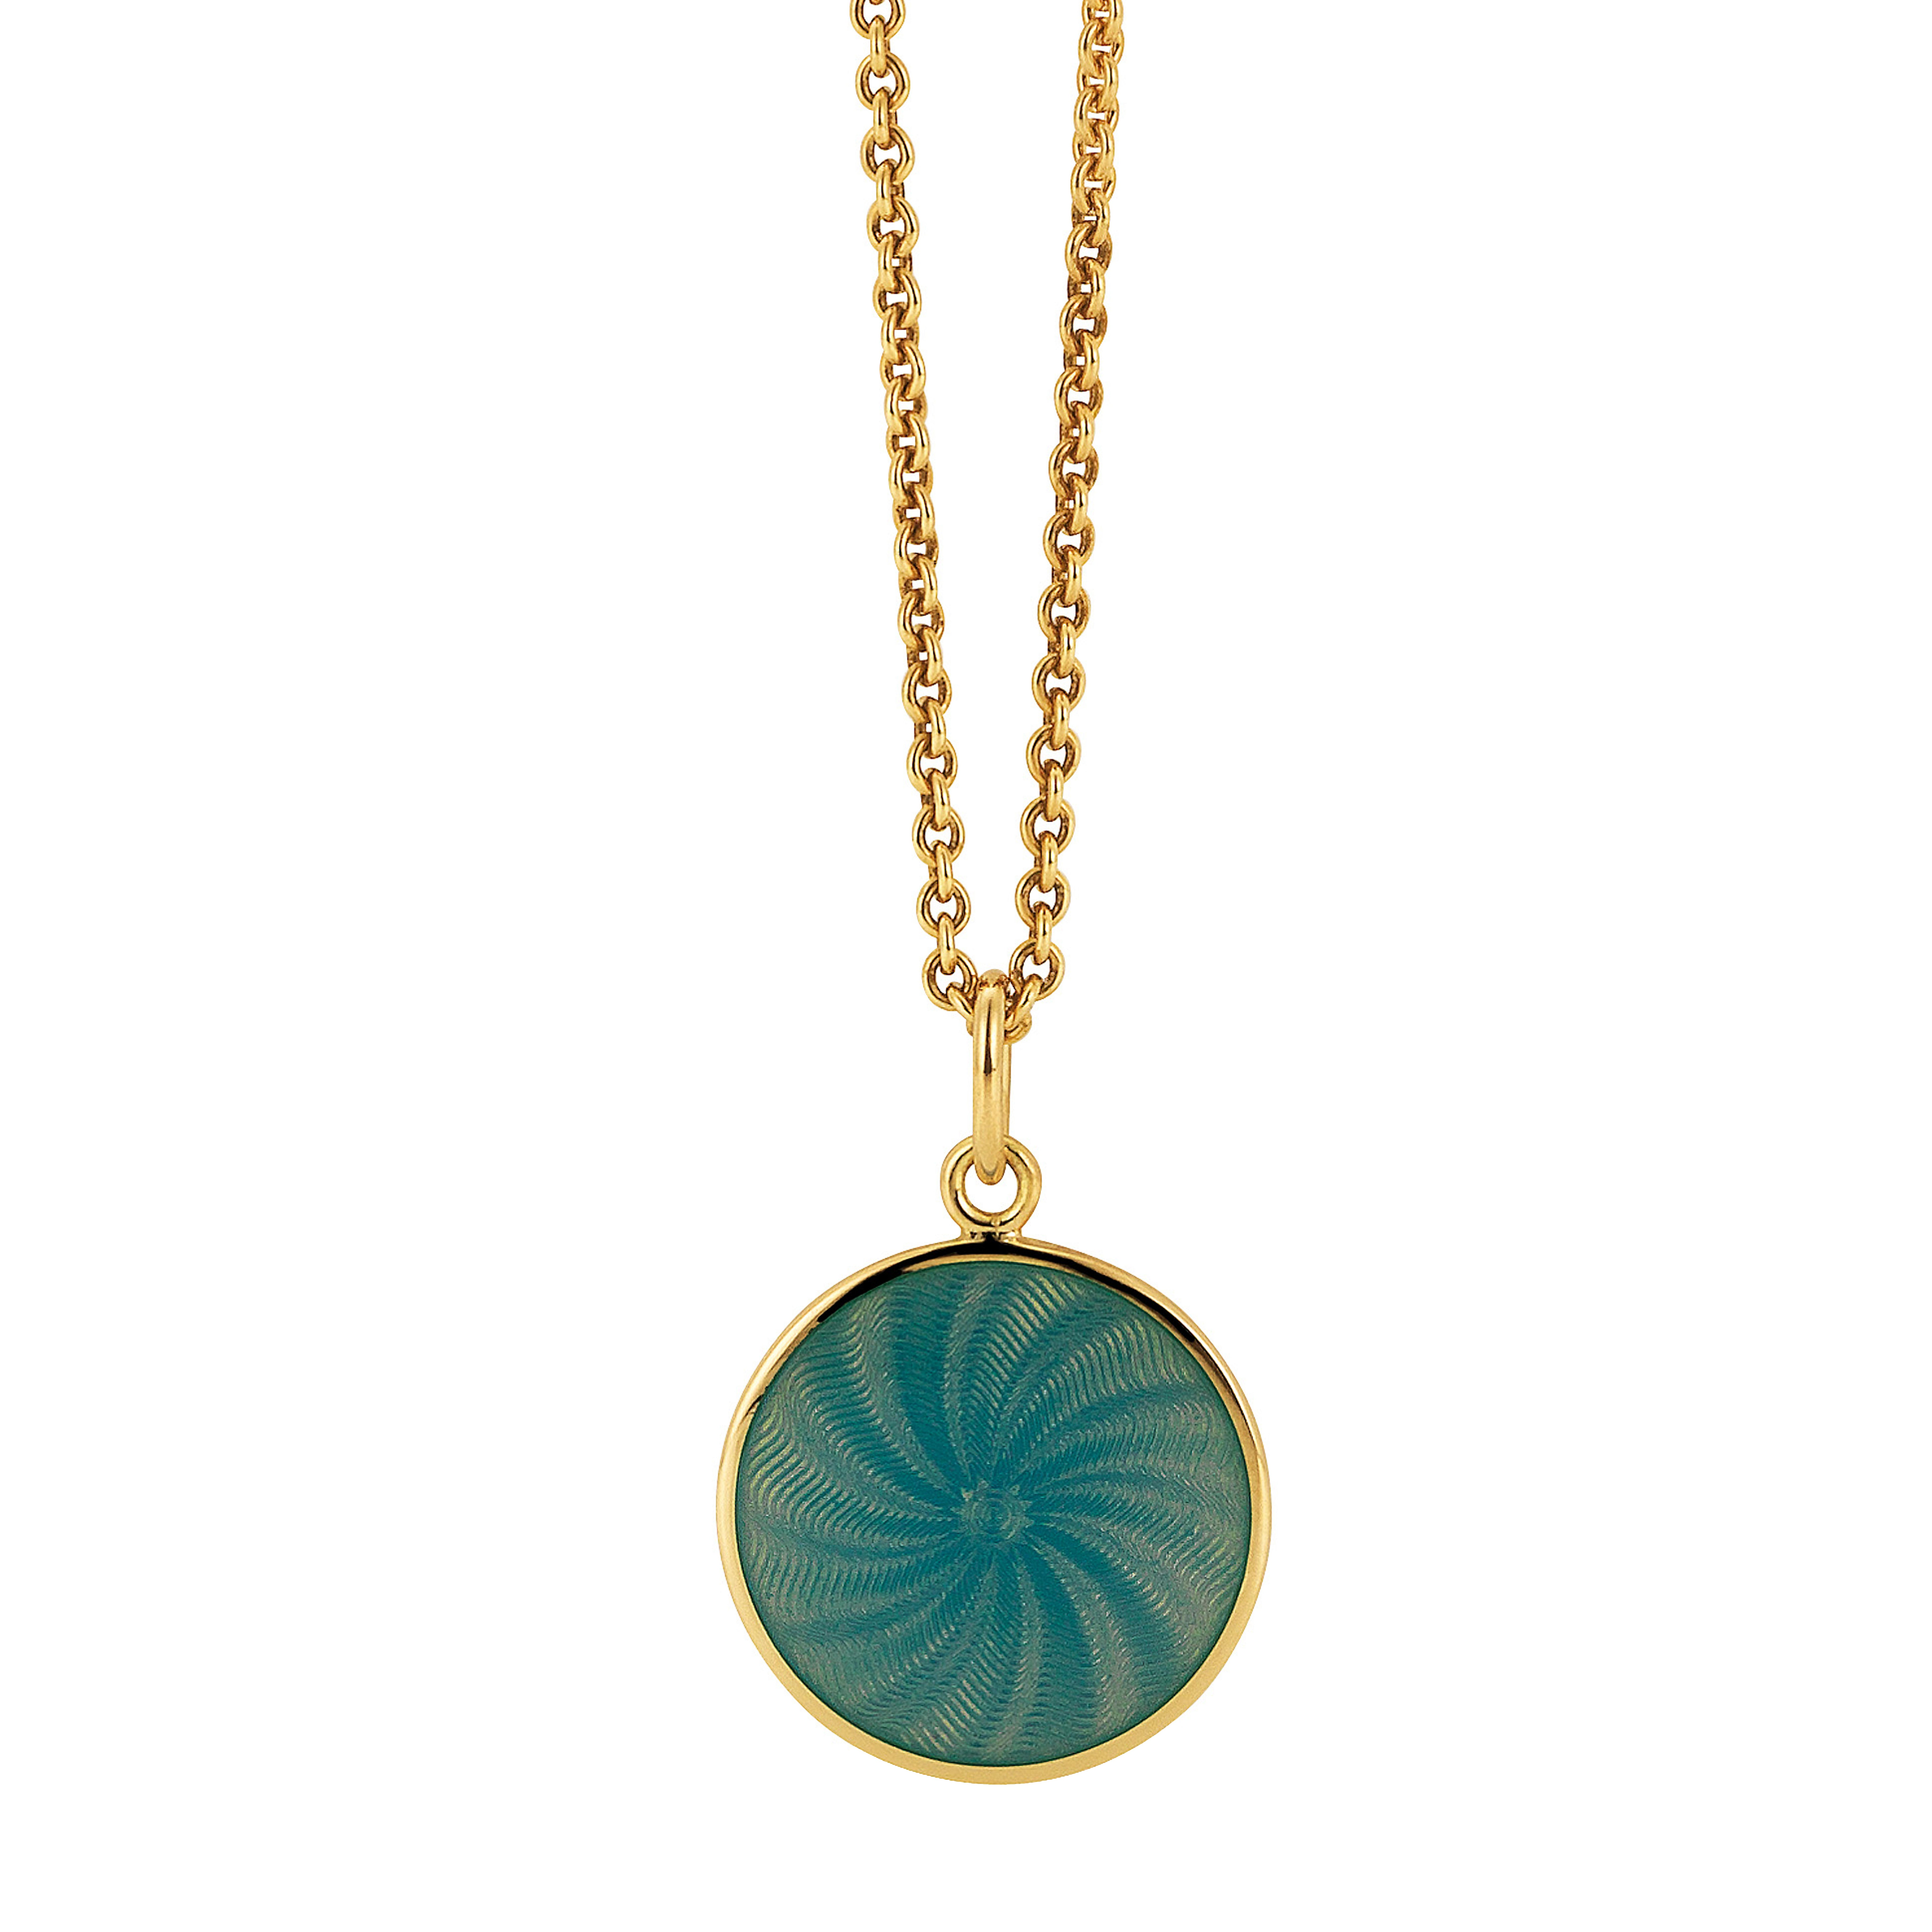 Victor Mayer round pendant necklace 18k yellow gold, Diskos Collection, opalescent turquoise vitreous guilloche enamel, diameter app. 15.0 mm

About the creator Victor Mayer
Victor Mayer is internationally renowned for elegant timeless designs and